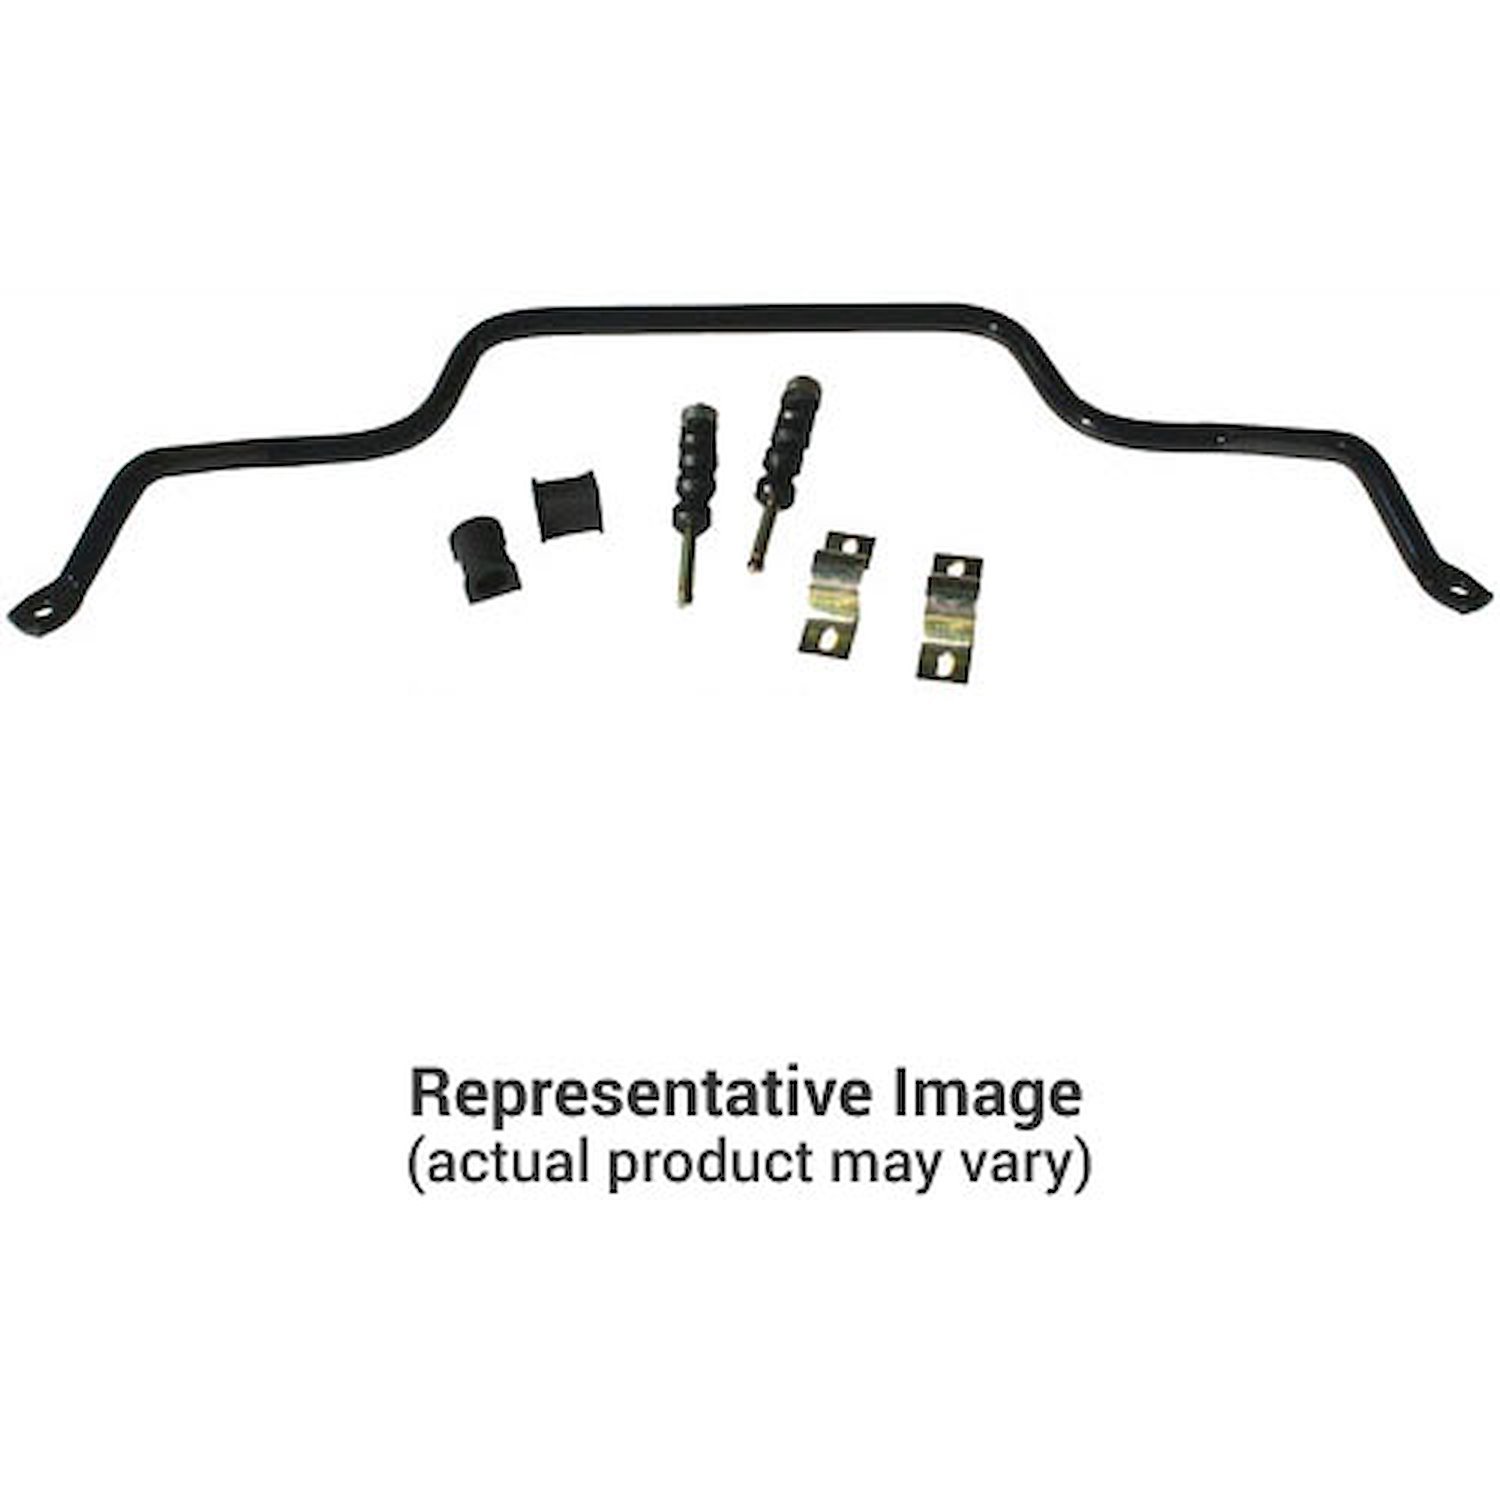 1 1/8" Front Sway Bar 1992-97 Ford F-350